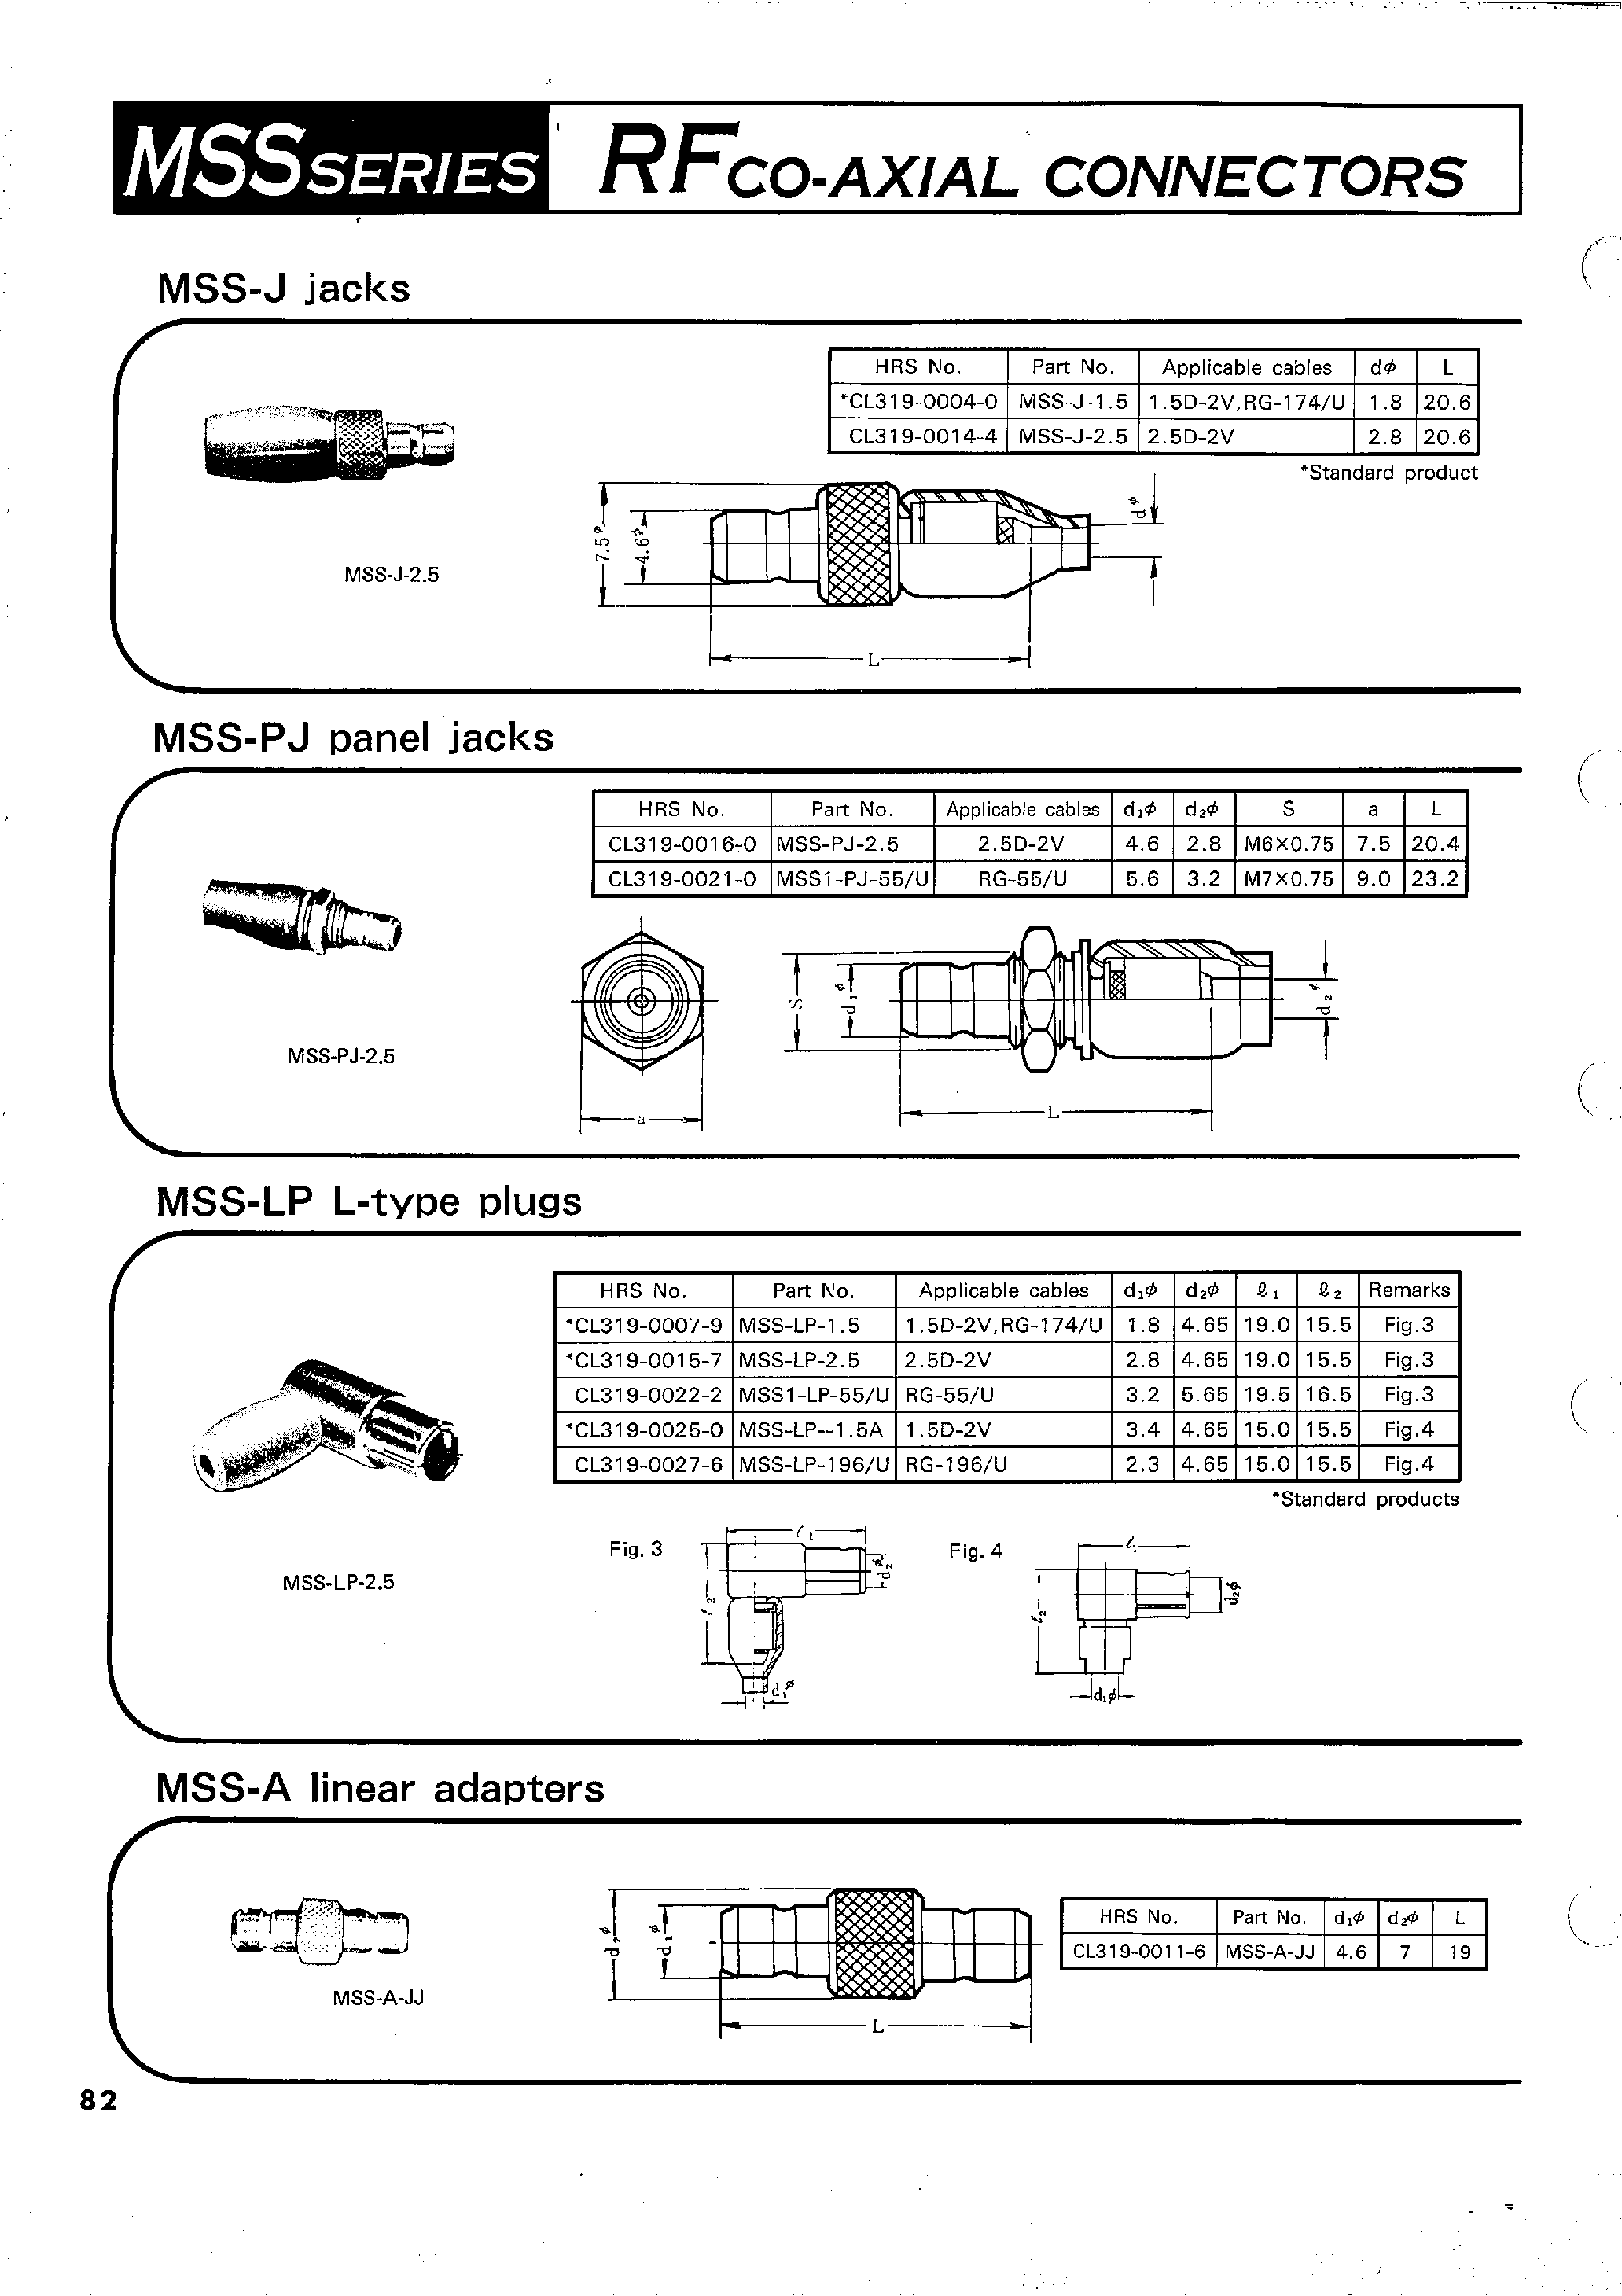 Datasheet CL319-0011-6 - RFCO-AXIAL CONNECTORS page 2